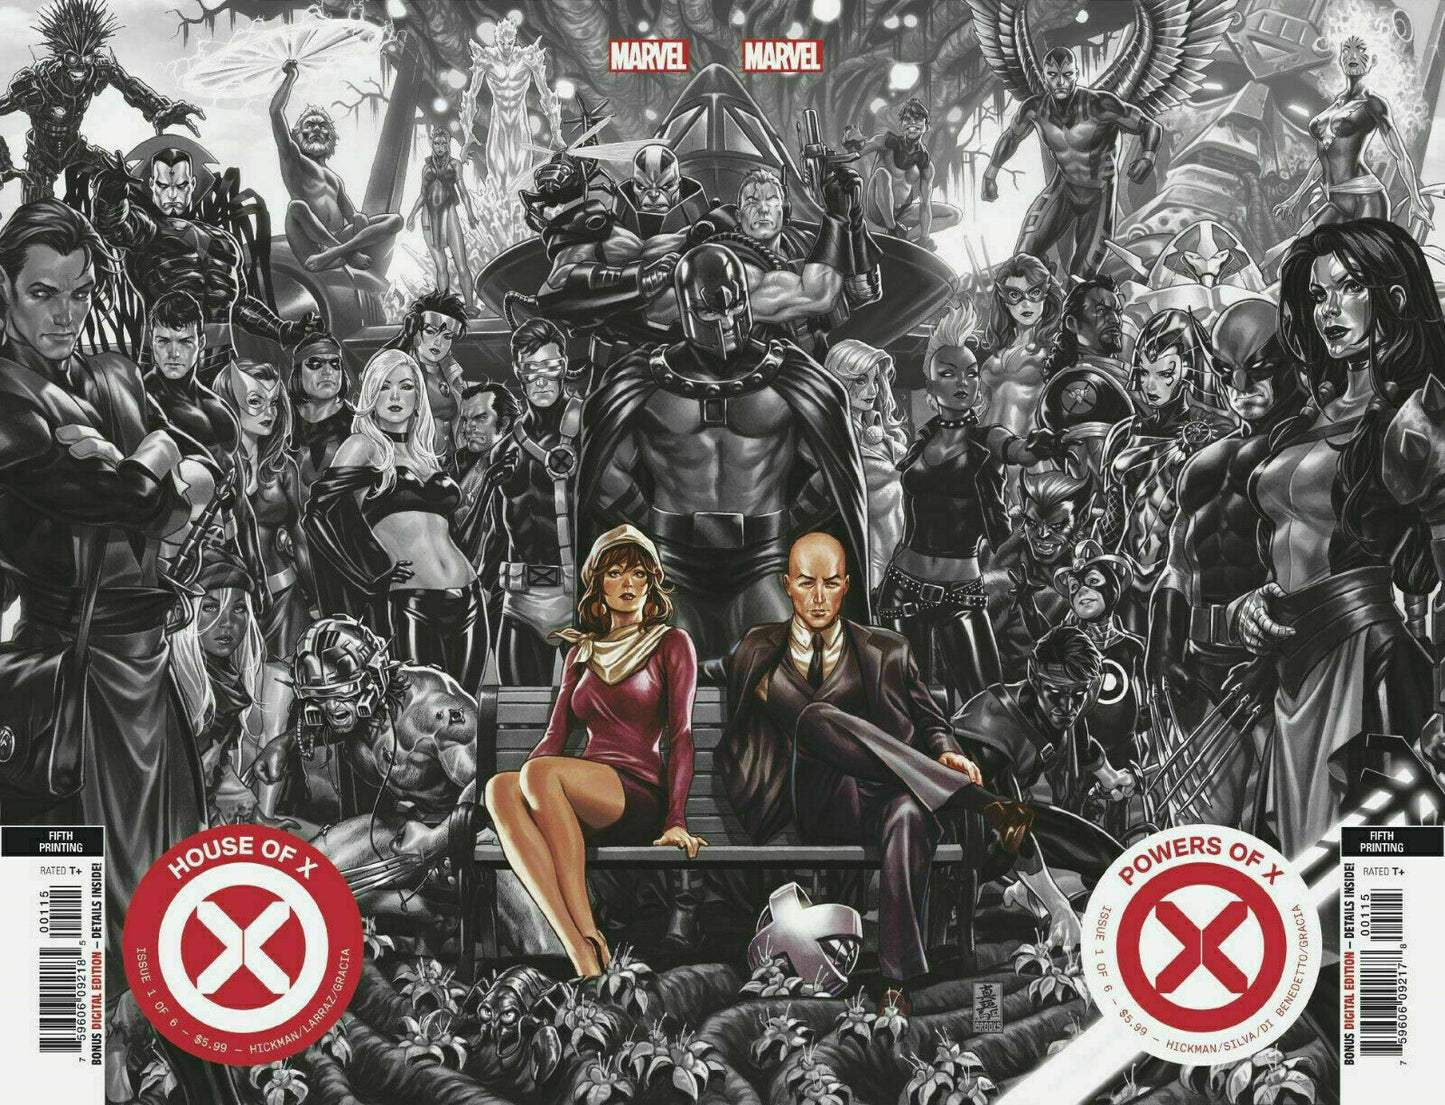 HOUSE OF X #1 & POWERS OF X #1 MARK BROOKS JOINING SET RARE 5TH PRINTS